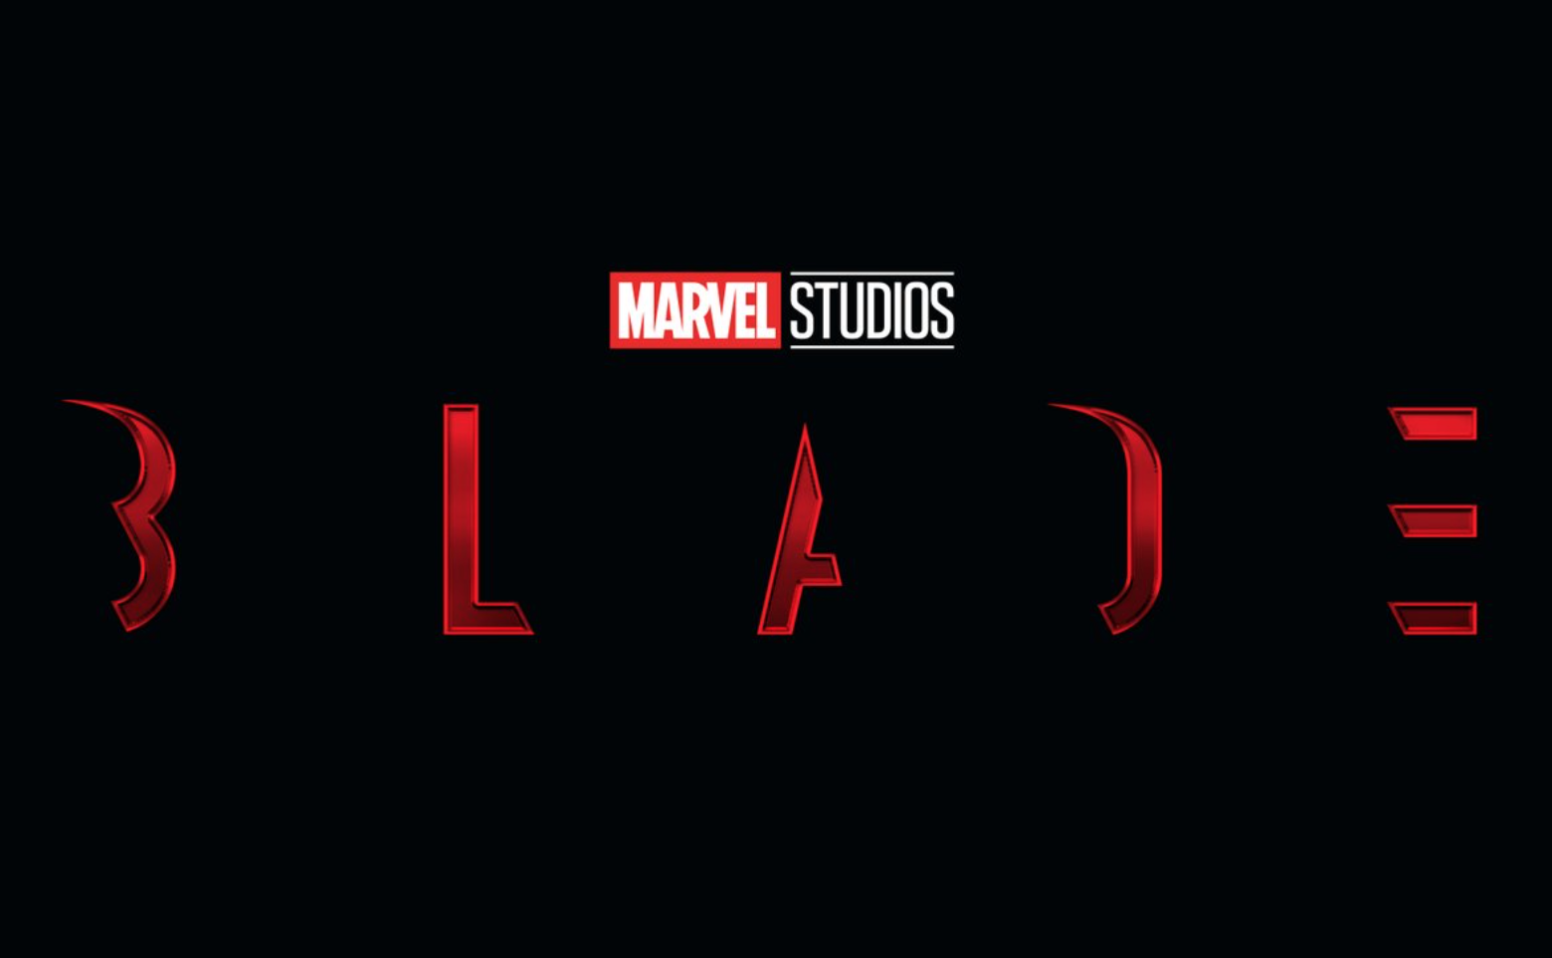 Marvel Hires Lovecraft Country Director For Upcoming ‘Blade’ Film Starring Mahershala Ali